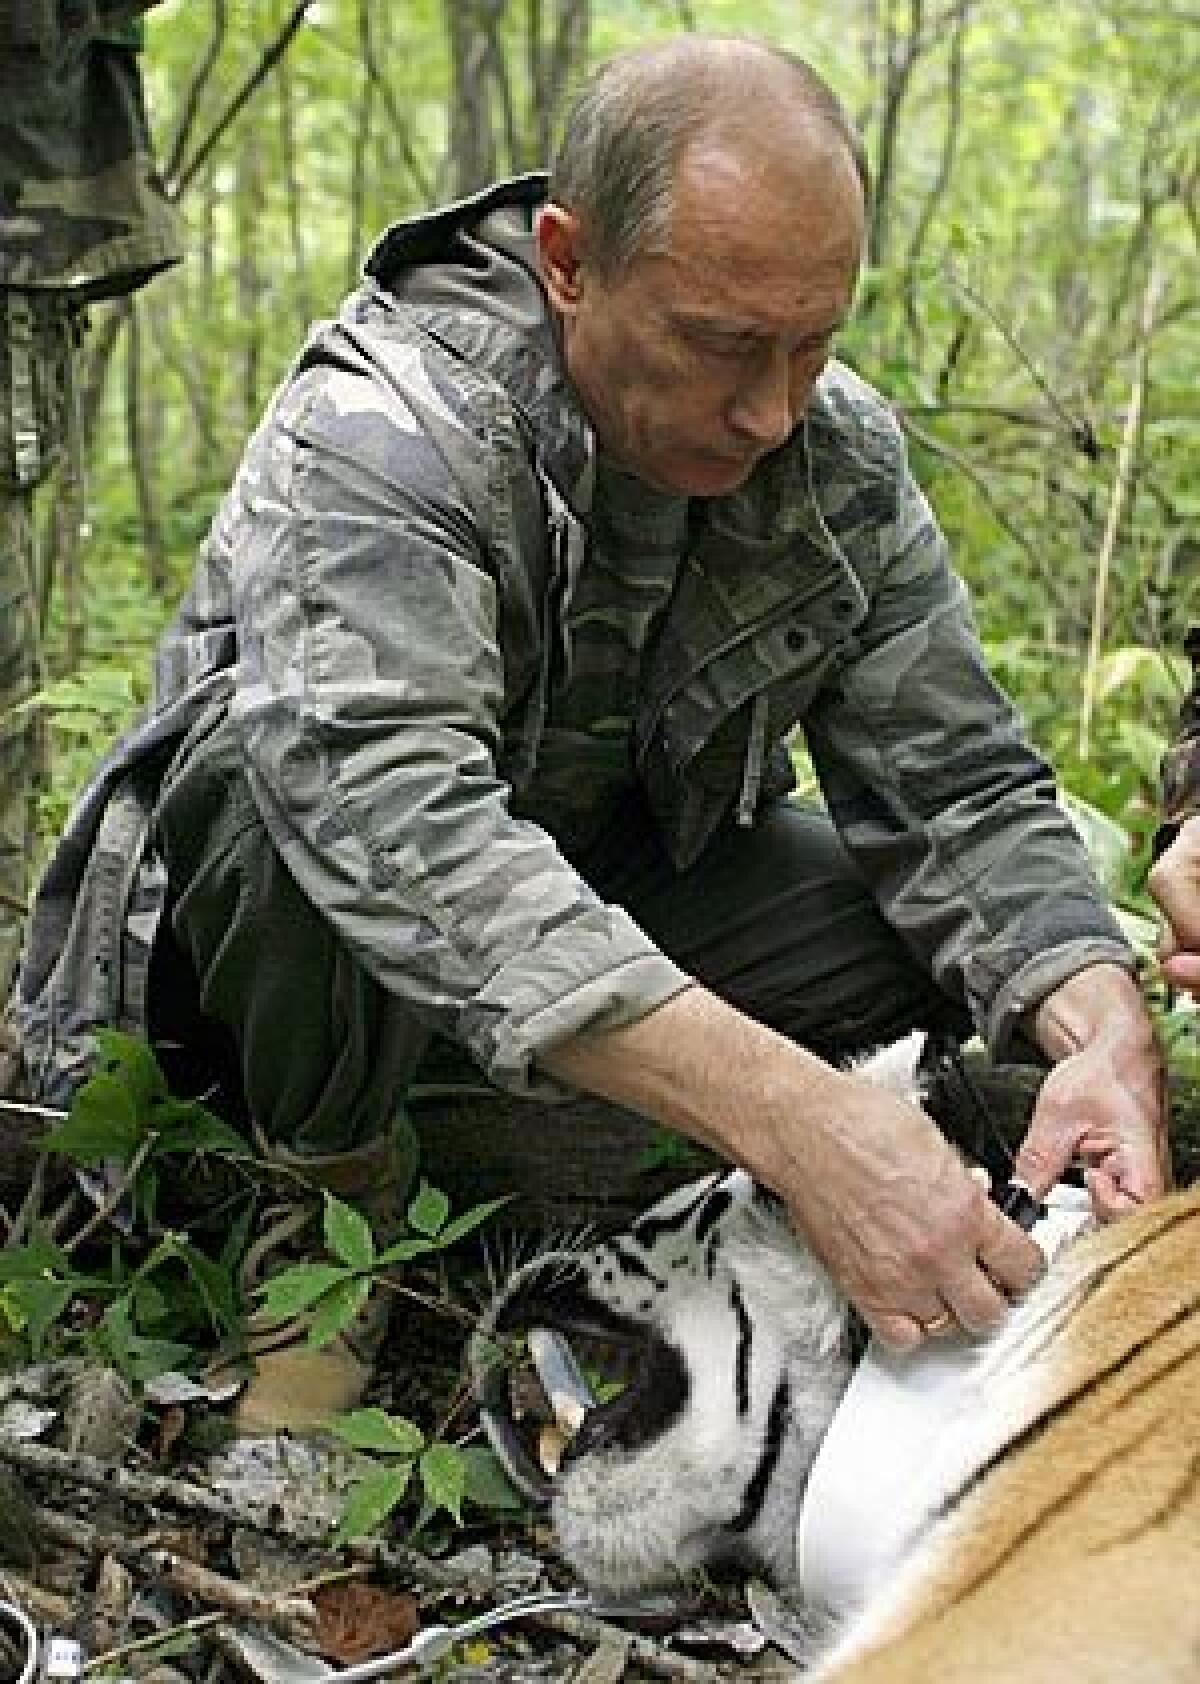 Russian Prime Minister Vladimir Putin fixes a GPS-Argos satellite transmitter onto a tiger during his visit to the Ussuriysky forest reserve of the Russian Academy of Sciences in the Far East on Sunday.